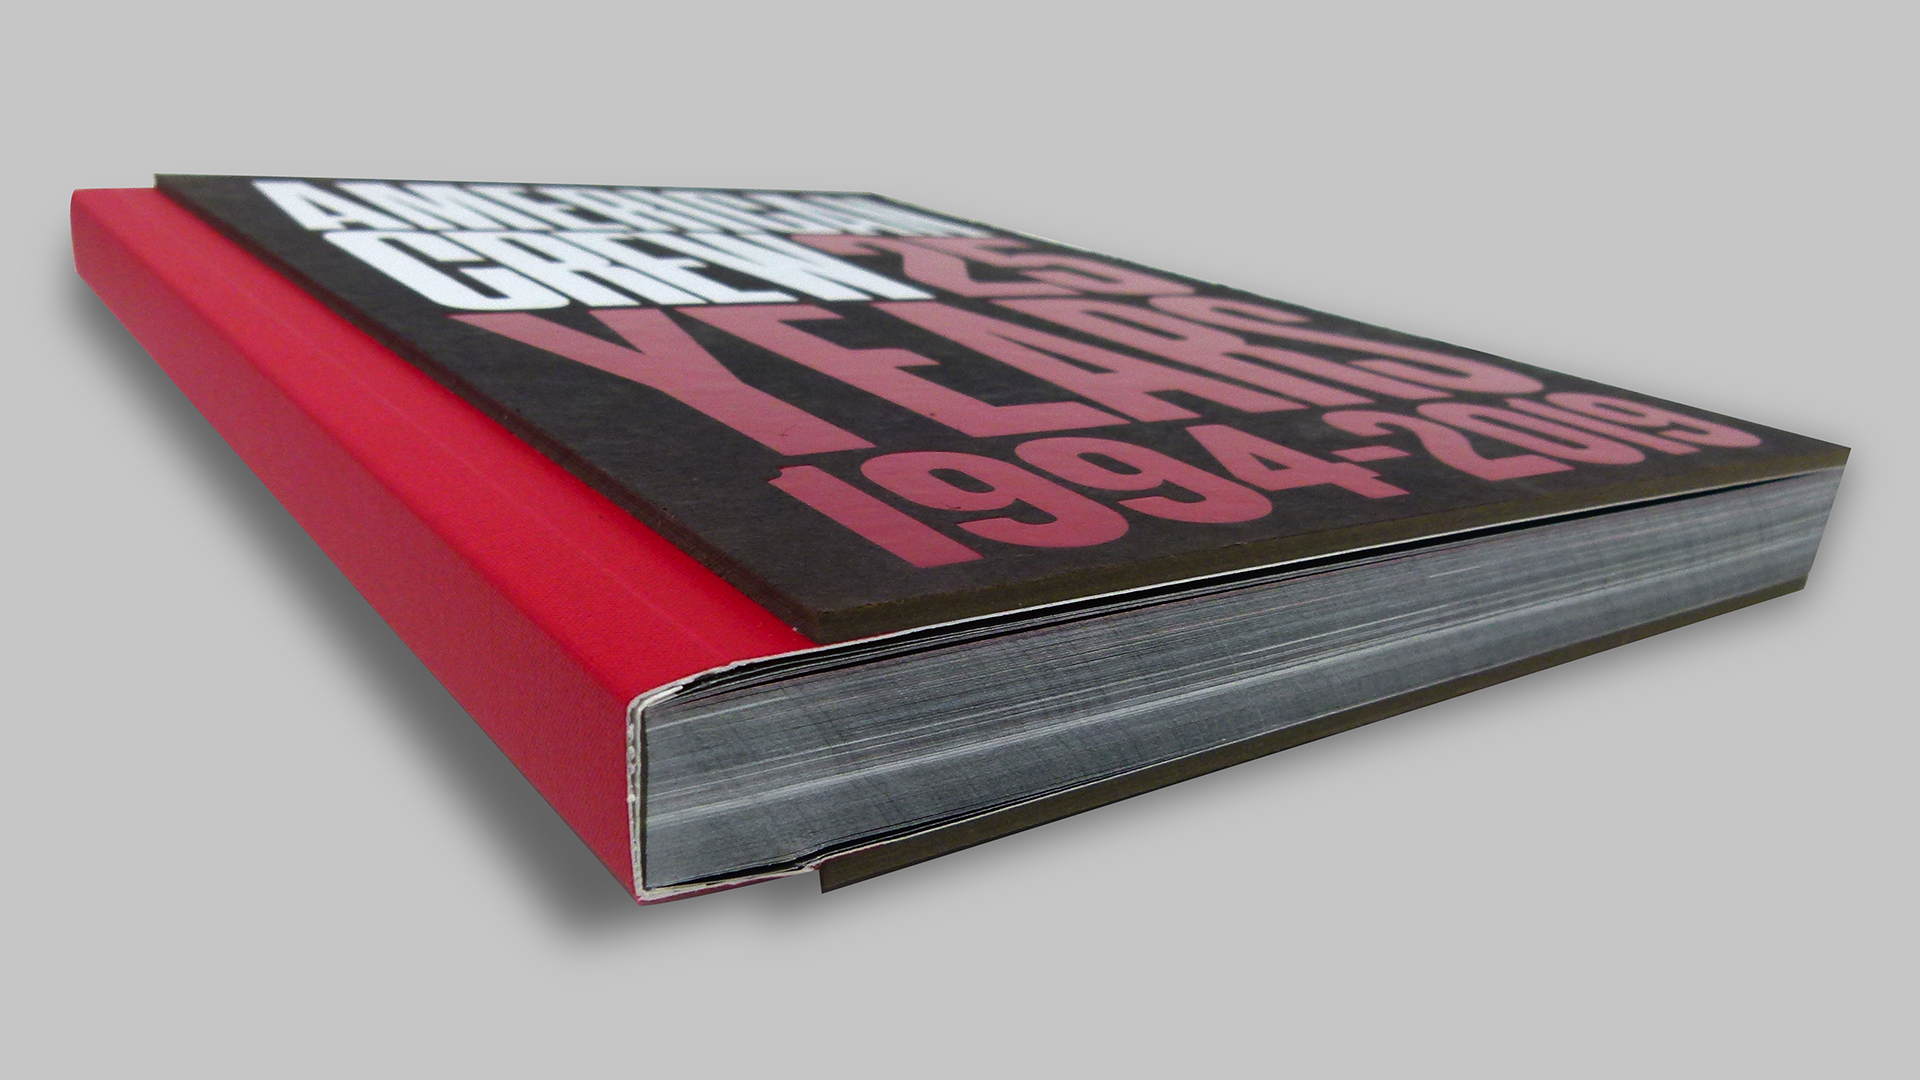 Coffee Table Book Design: 'American Crew 25 Years' - PaperSpecs